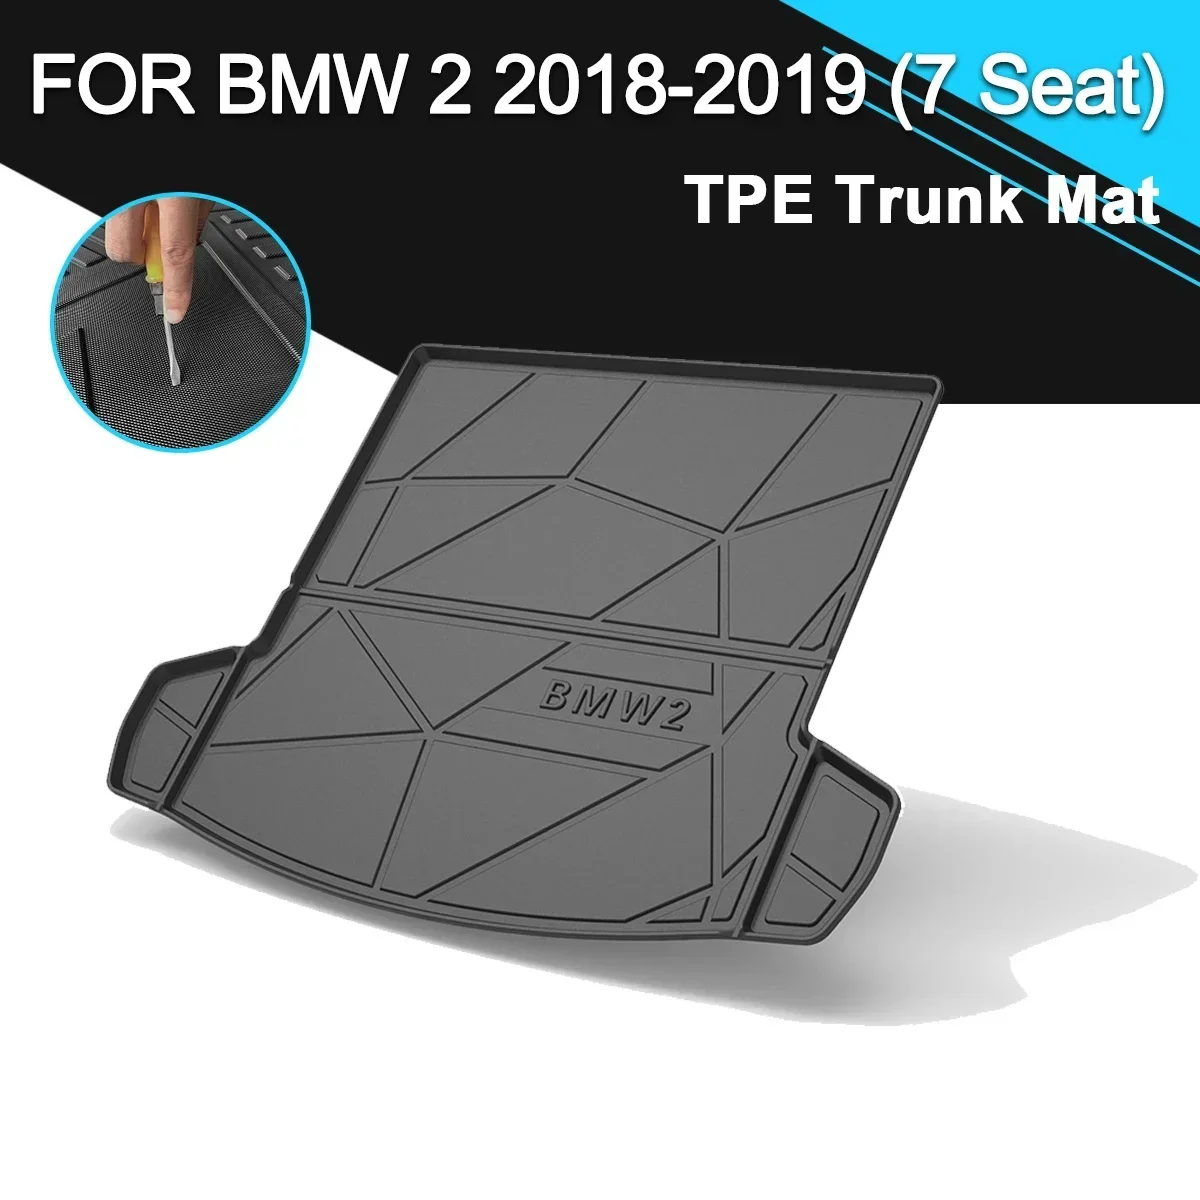 

Car Rear Trunk Cover Mat TPE Waterproof Non-Slip Rubber Cargo Liner Auto Accessories For BMW 2 Series 2018-2019 7 Seat